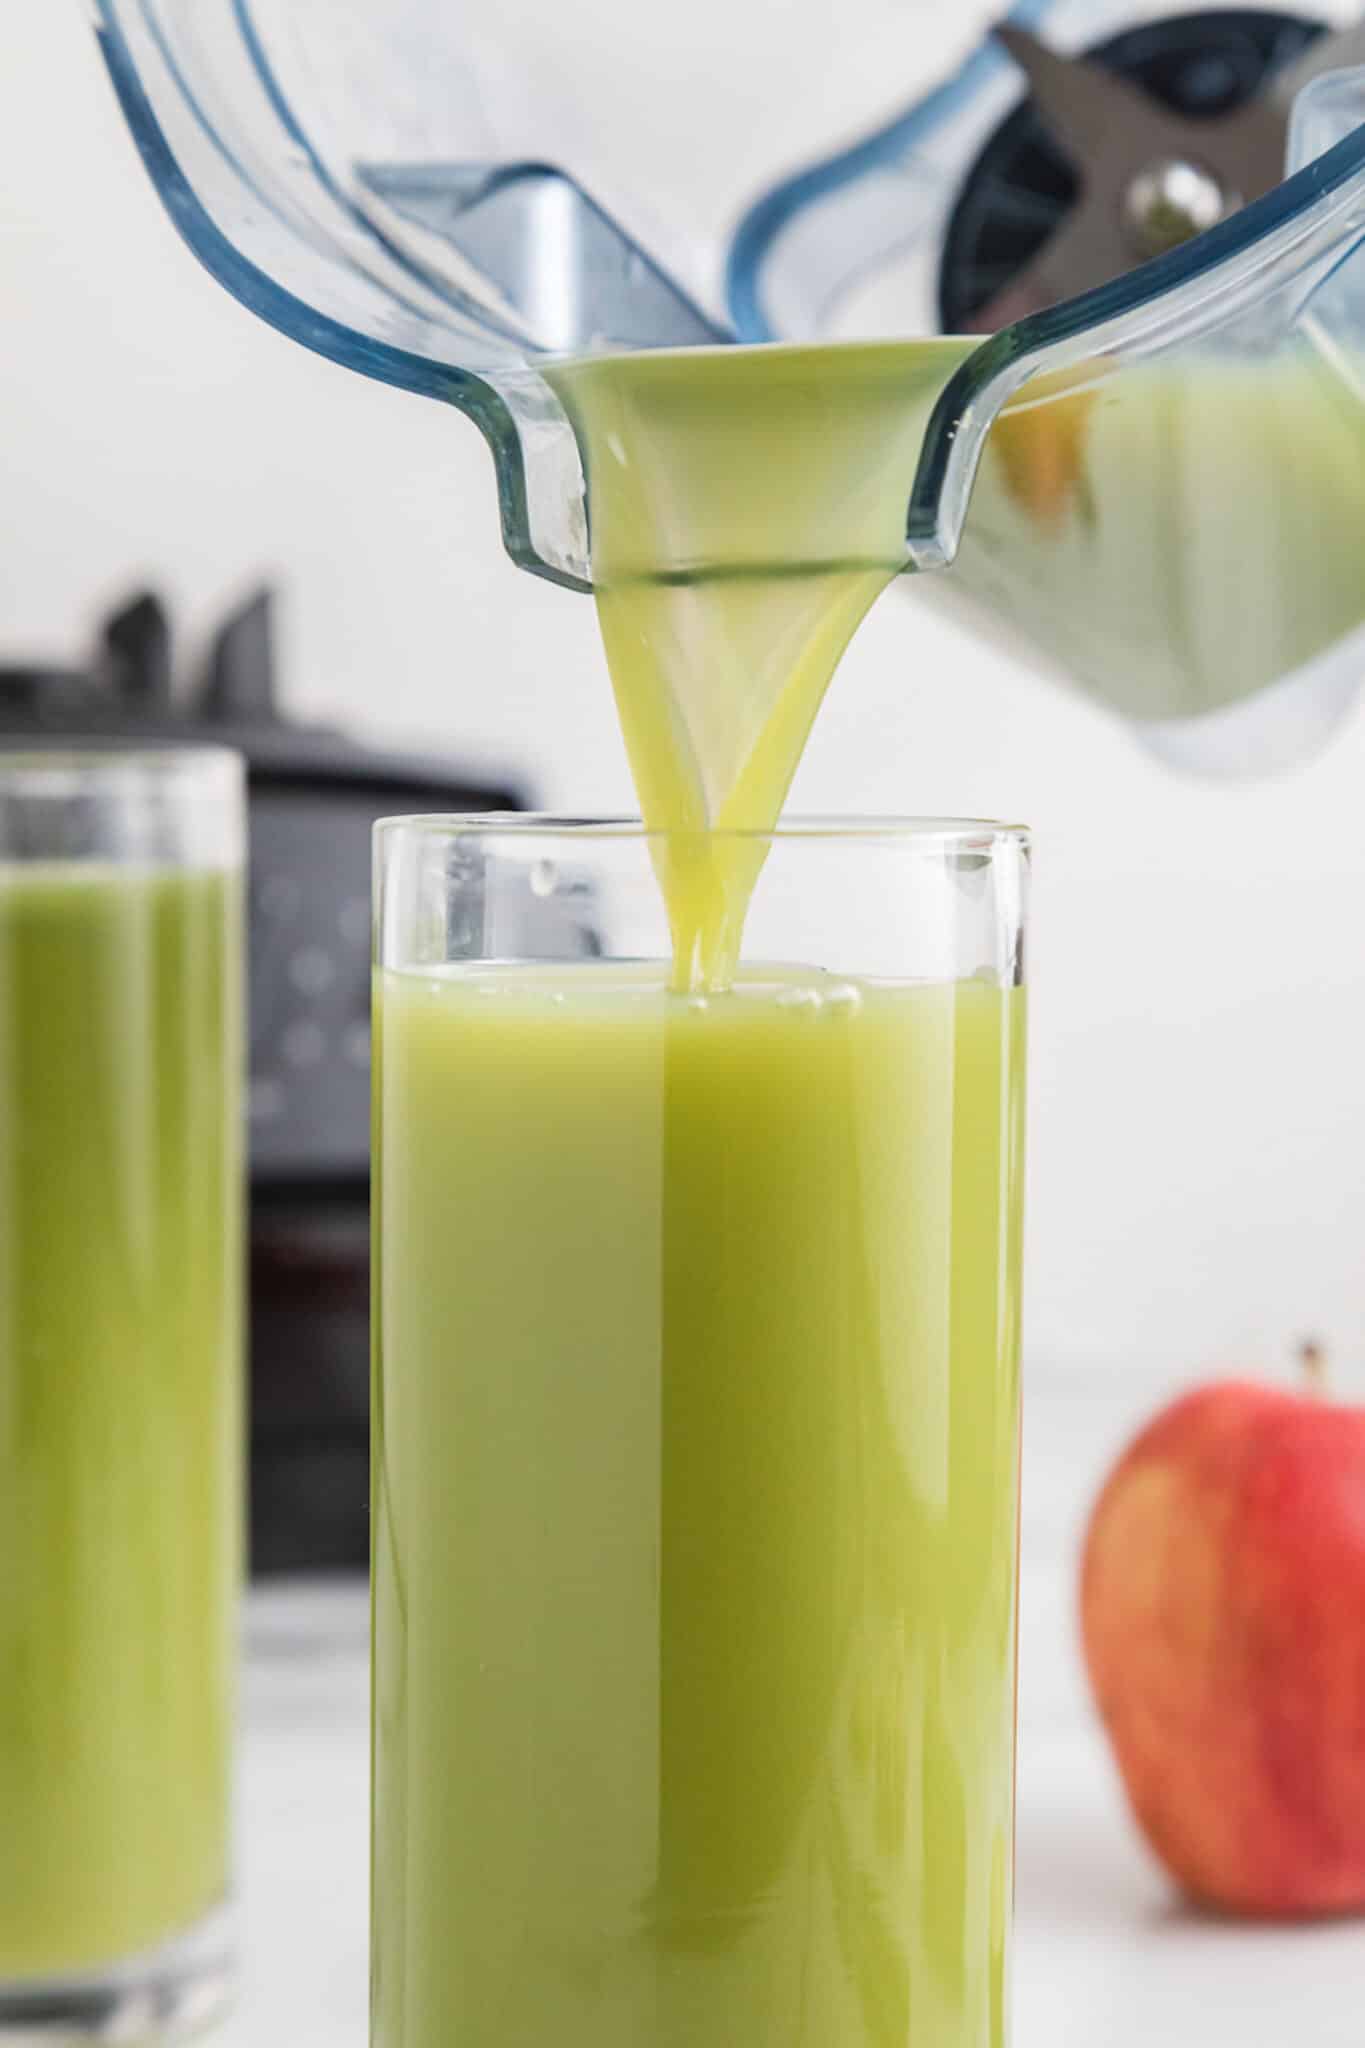 Cucumber celery juice being poured into a glass from the jar of a blender.